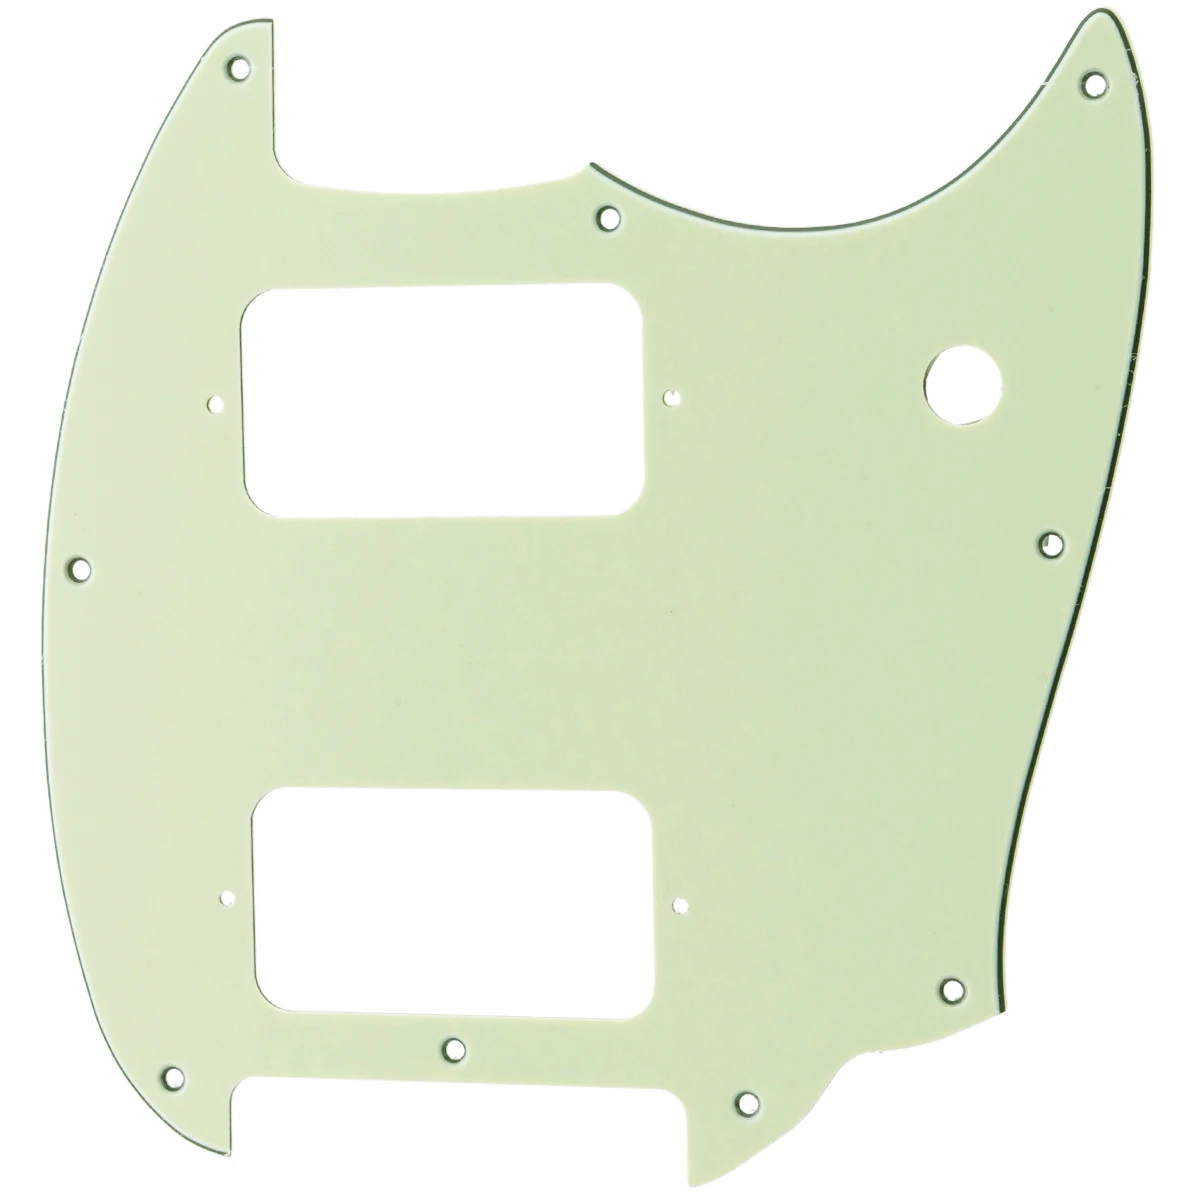 Musiclily Pro 9 Holes Round Corner HH Guitar Pickguard 2 Humbuckers for Squier Bullet Series Mustang, 3Ply Mint Green